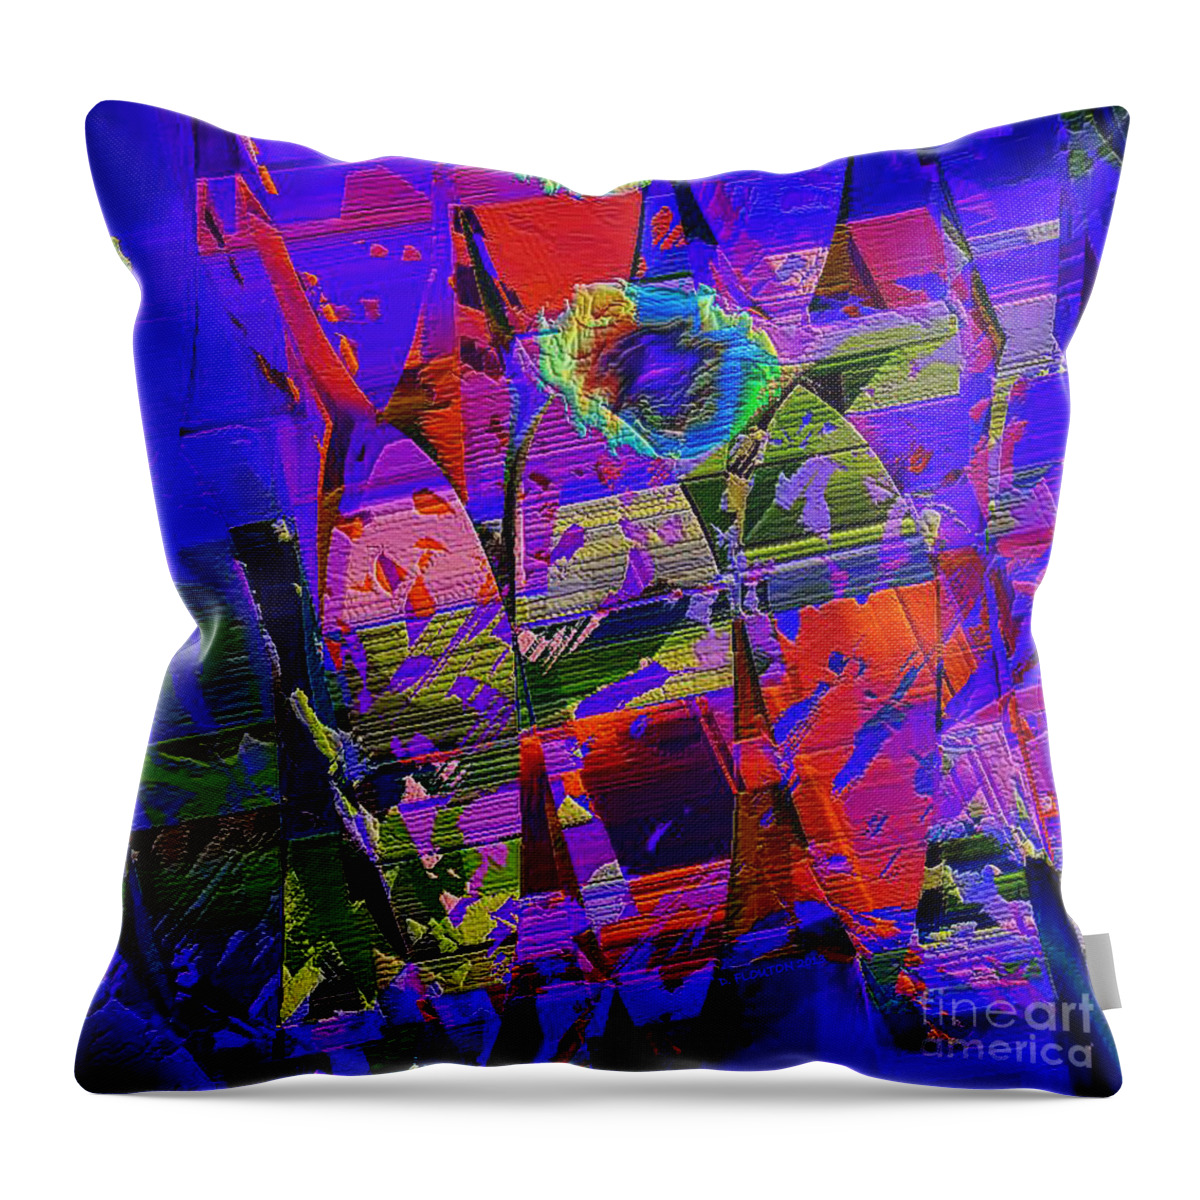 3 Blue Geometric Shapes Throw Pillow featuring the digital art Threesome by Dee Flouton